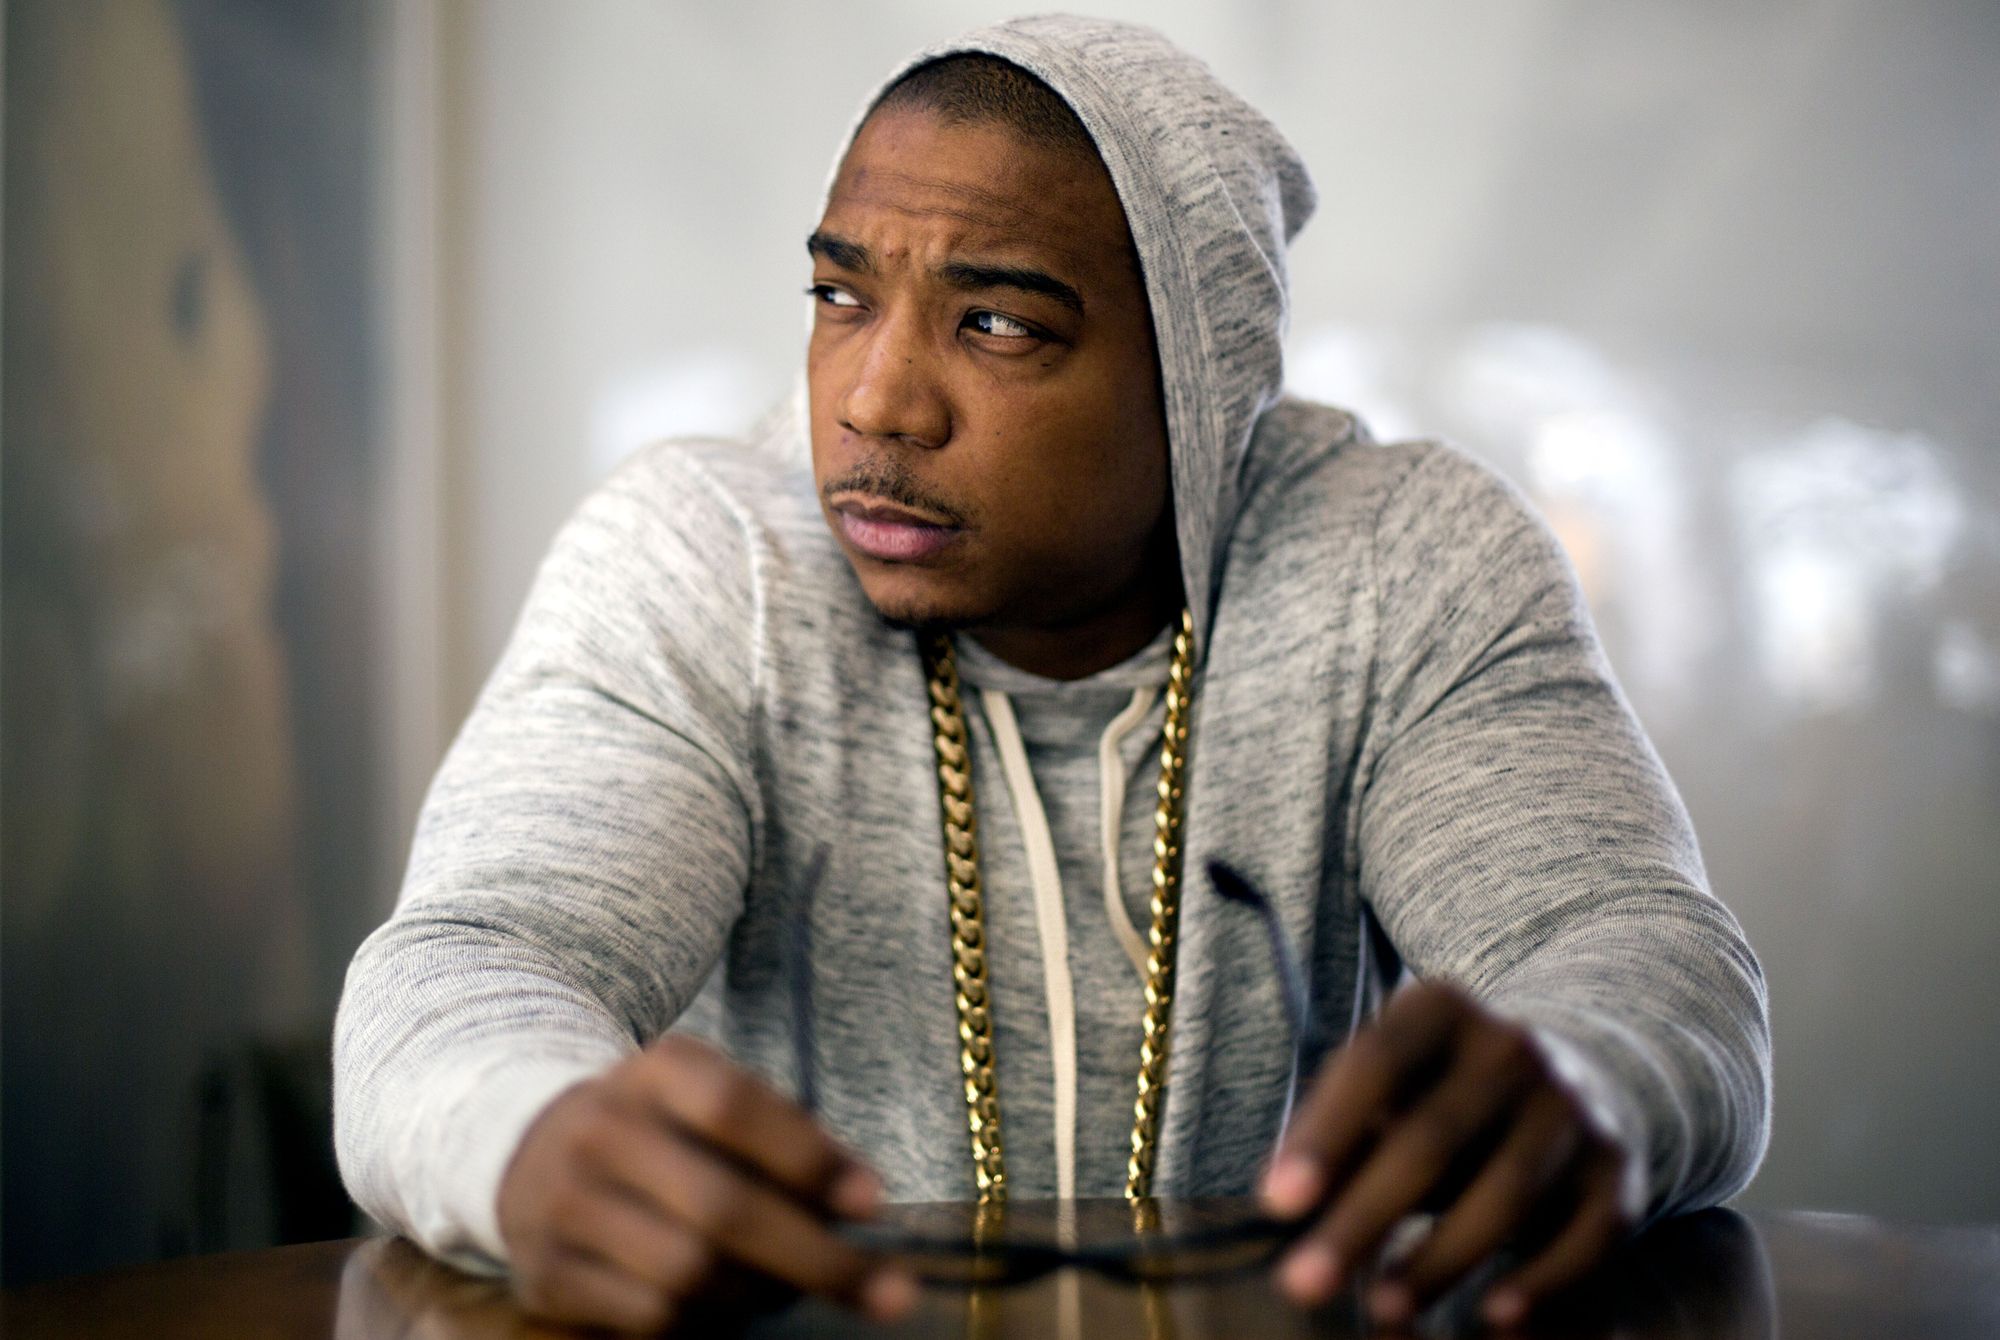 Music: Ja Rule “Tell Your Friends” (Remix)